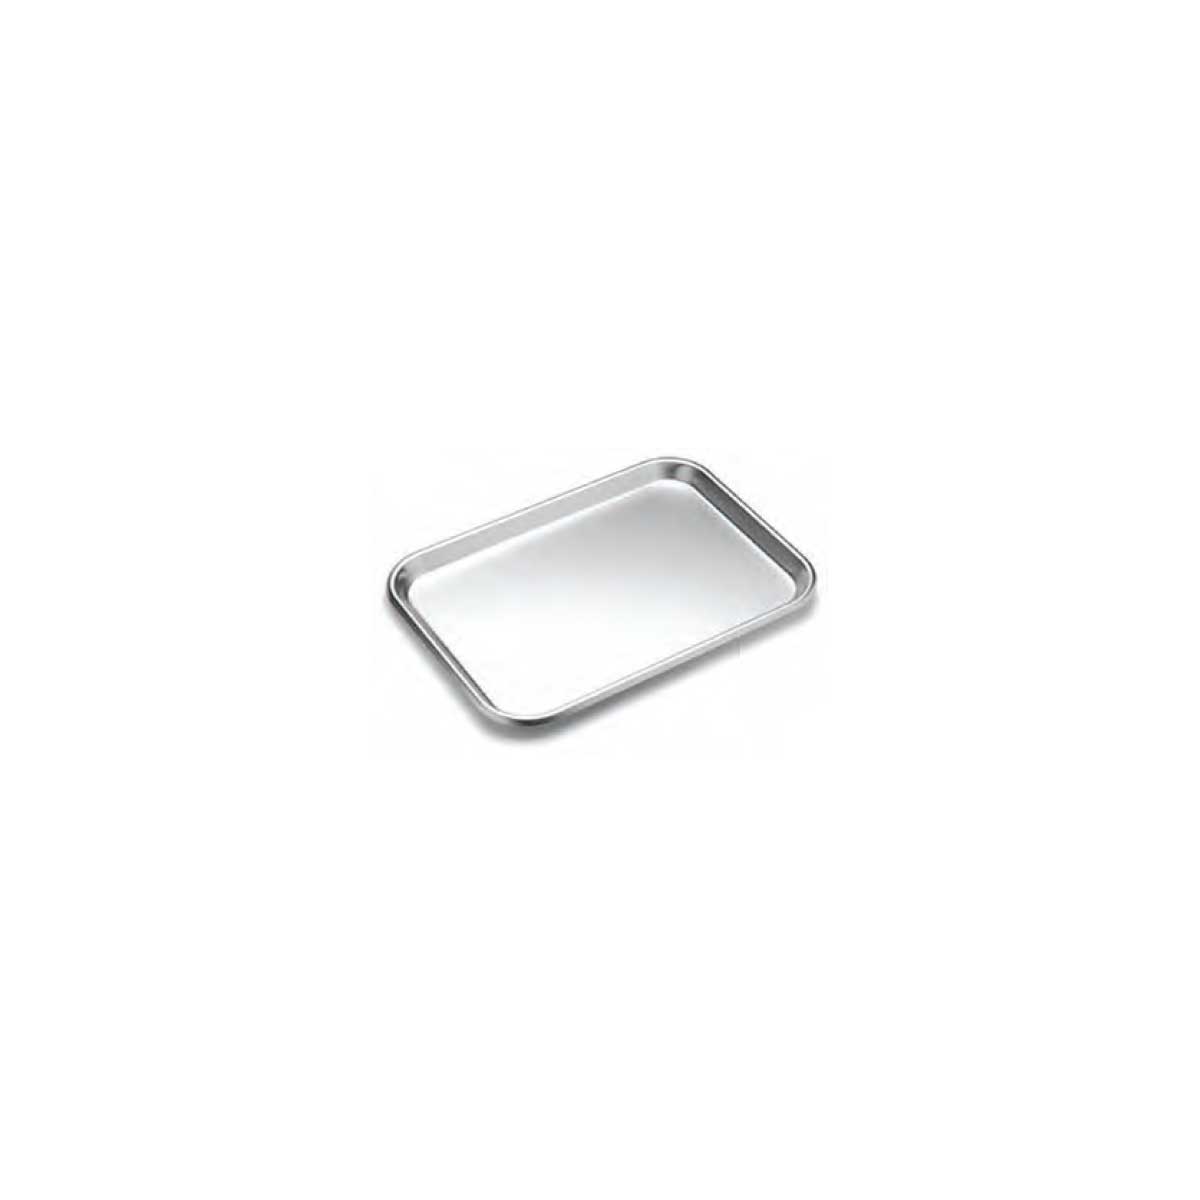 Stainless Steel Tray • Premium quality stainless steel • Size 13F (9-3/4” x 13-1/2”) #52026